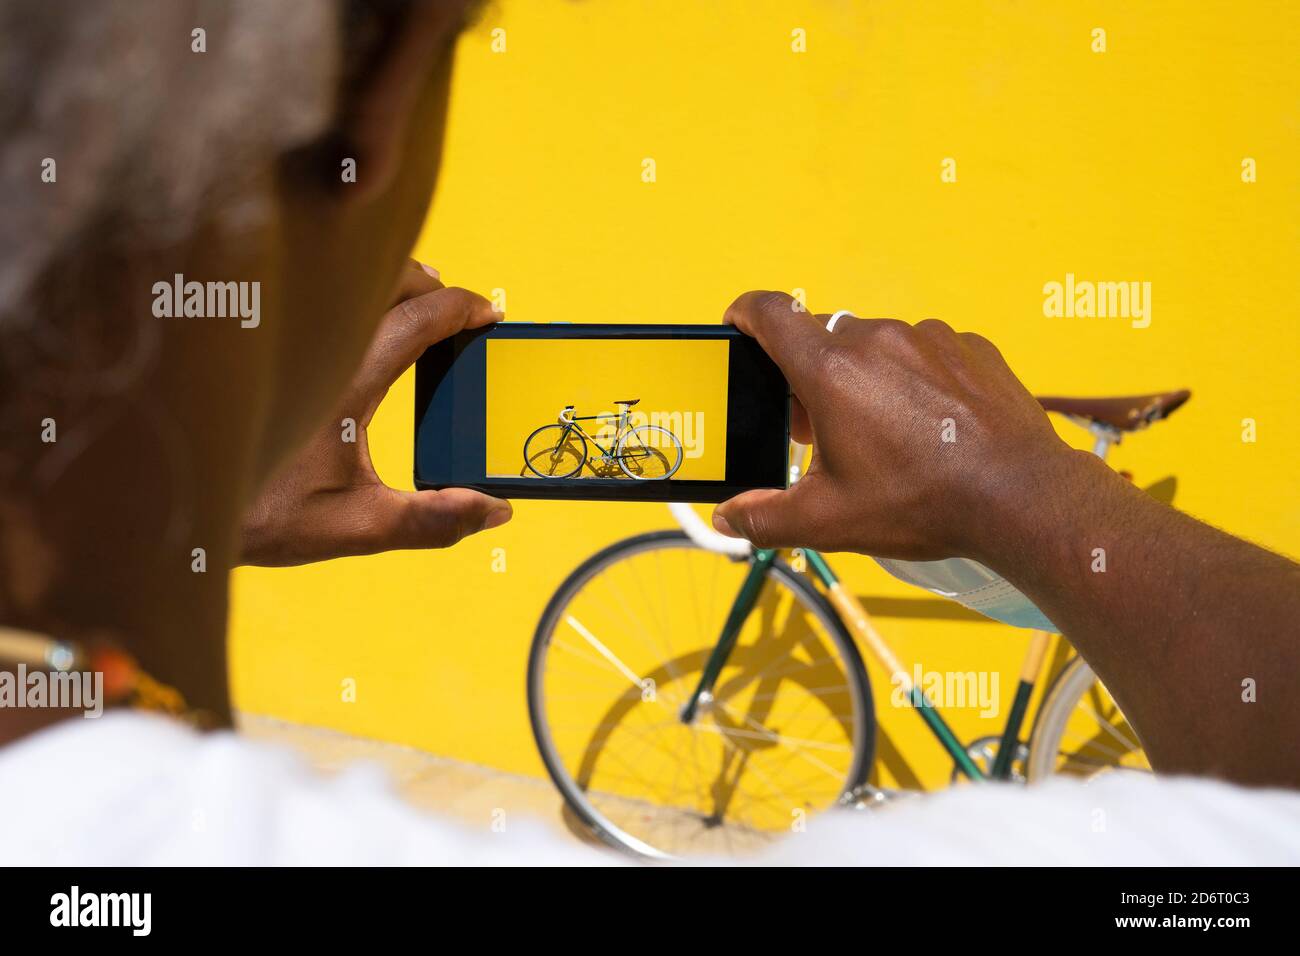 Black man taking a photo of his bike with the phone on a yellow background